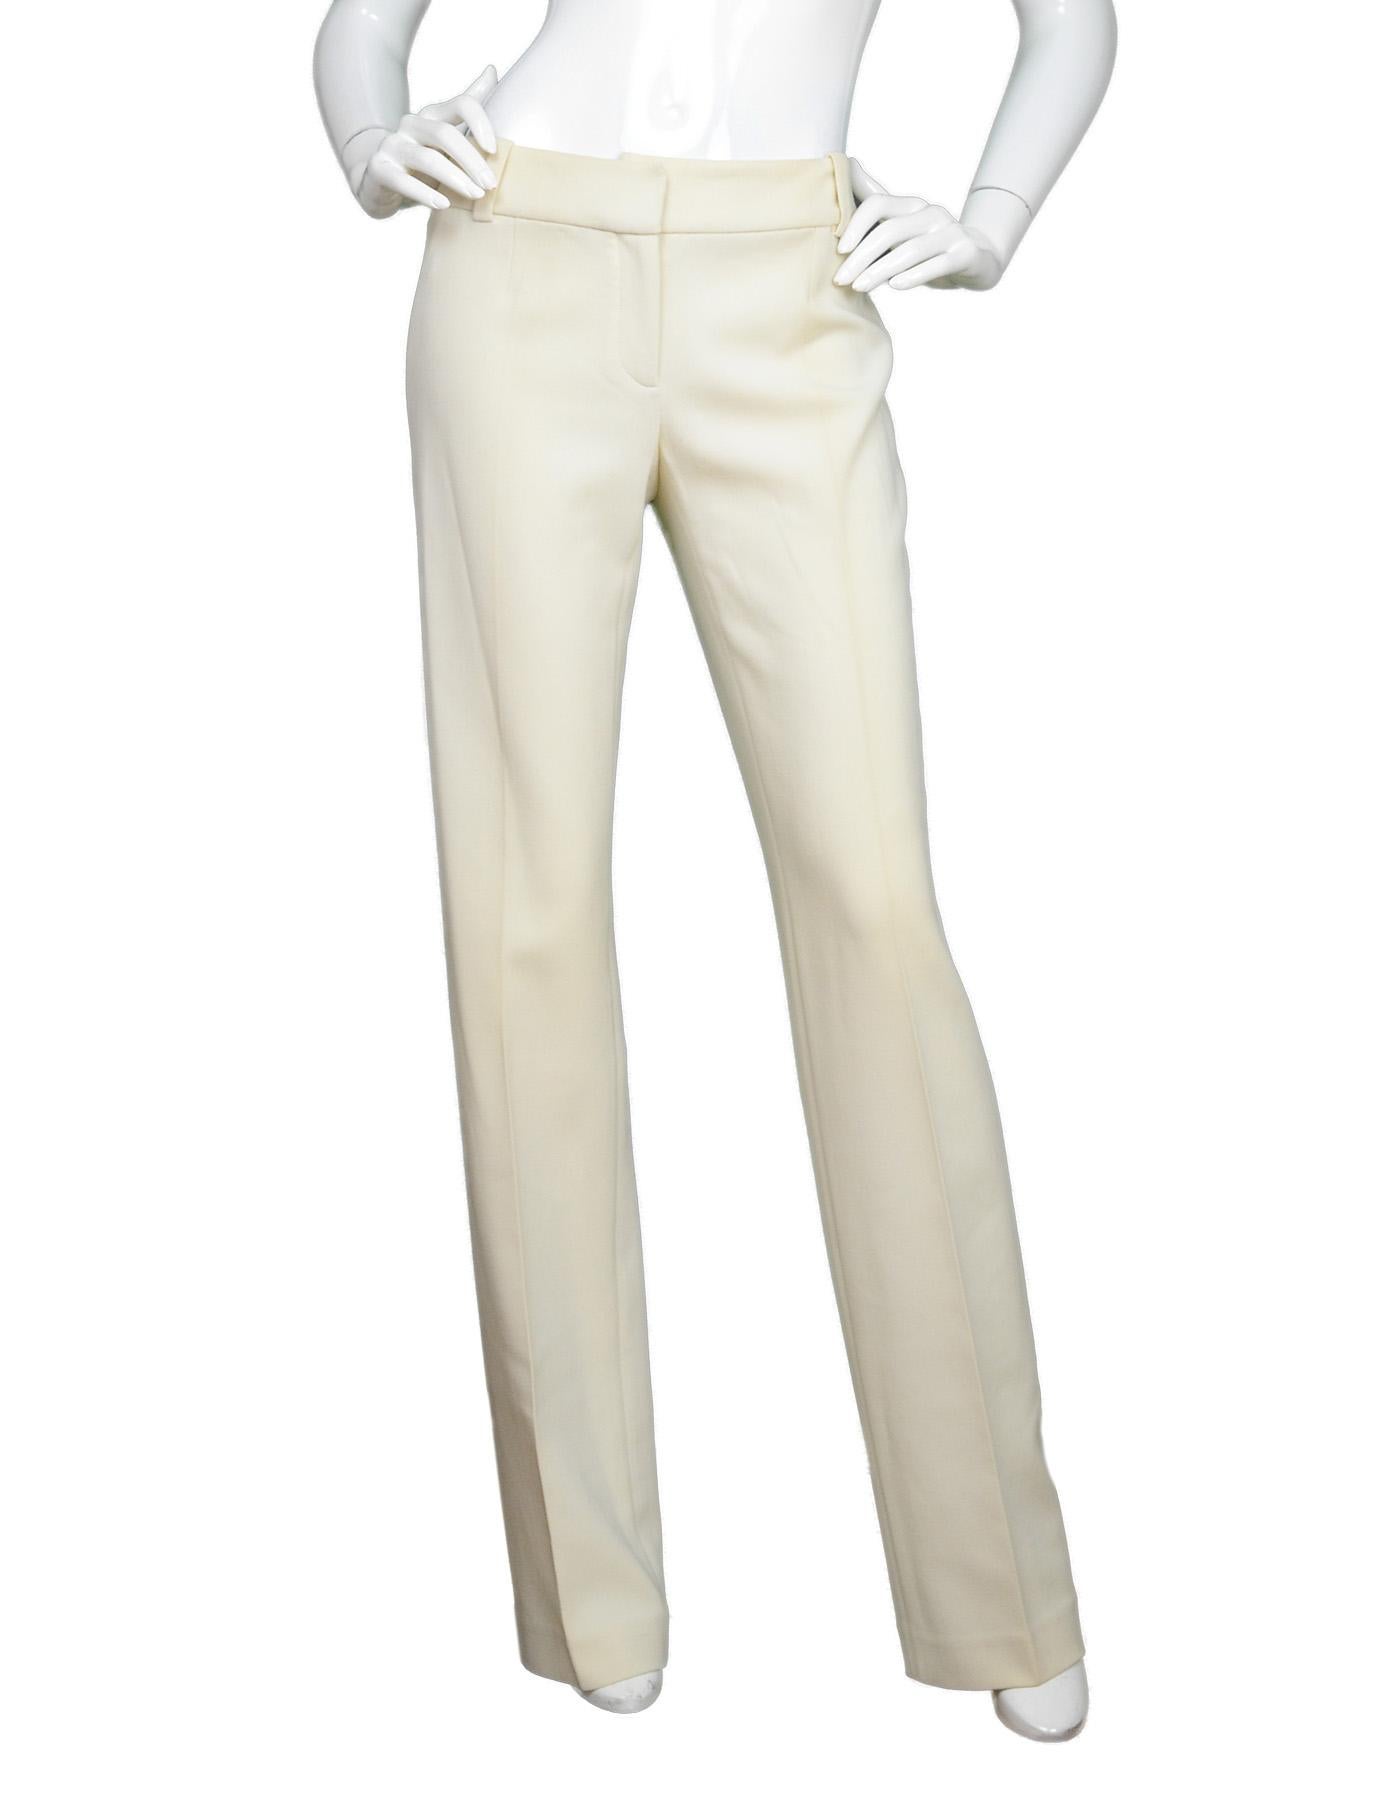 Celine Cream Straight Leg Slacks Pants Sz 36

Made In: France
Color:  Cream
Materials: 96% wool, 4% elastane
Overall Condition: Excellent pre-owned condition with exception of spot on back belt loop

Measurements:   
Waist: 29